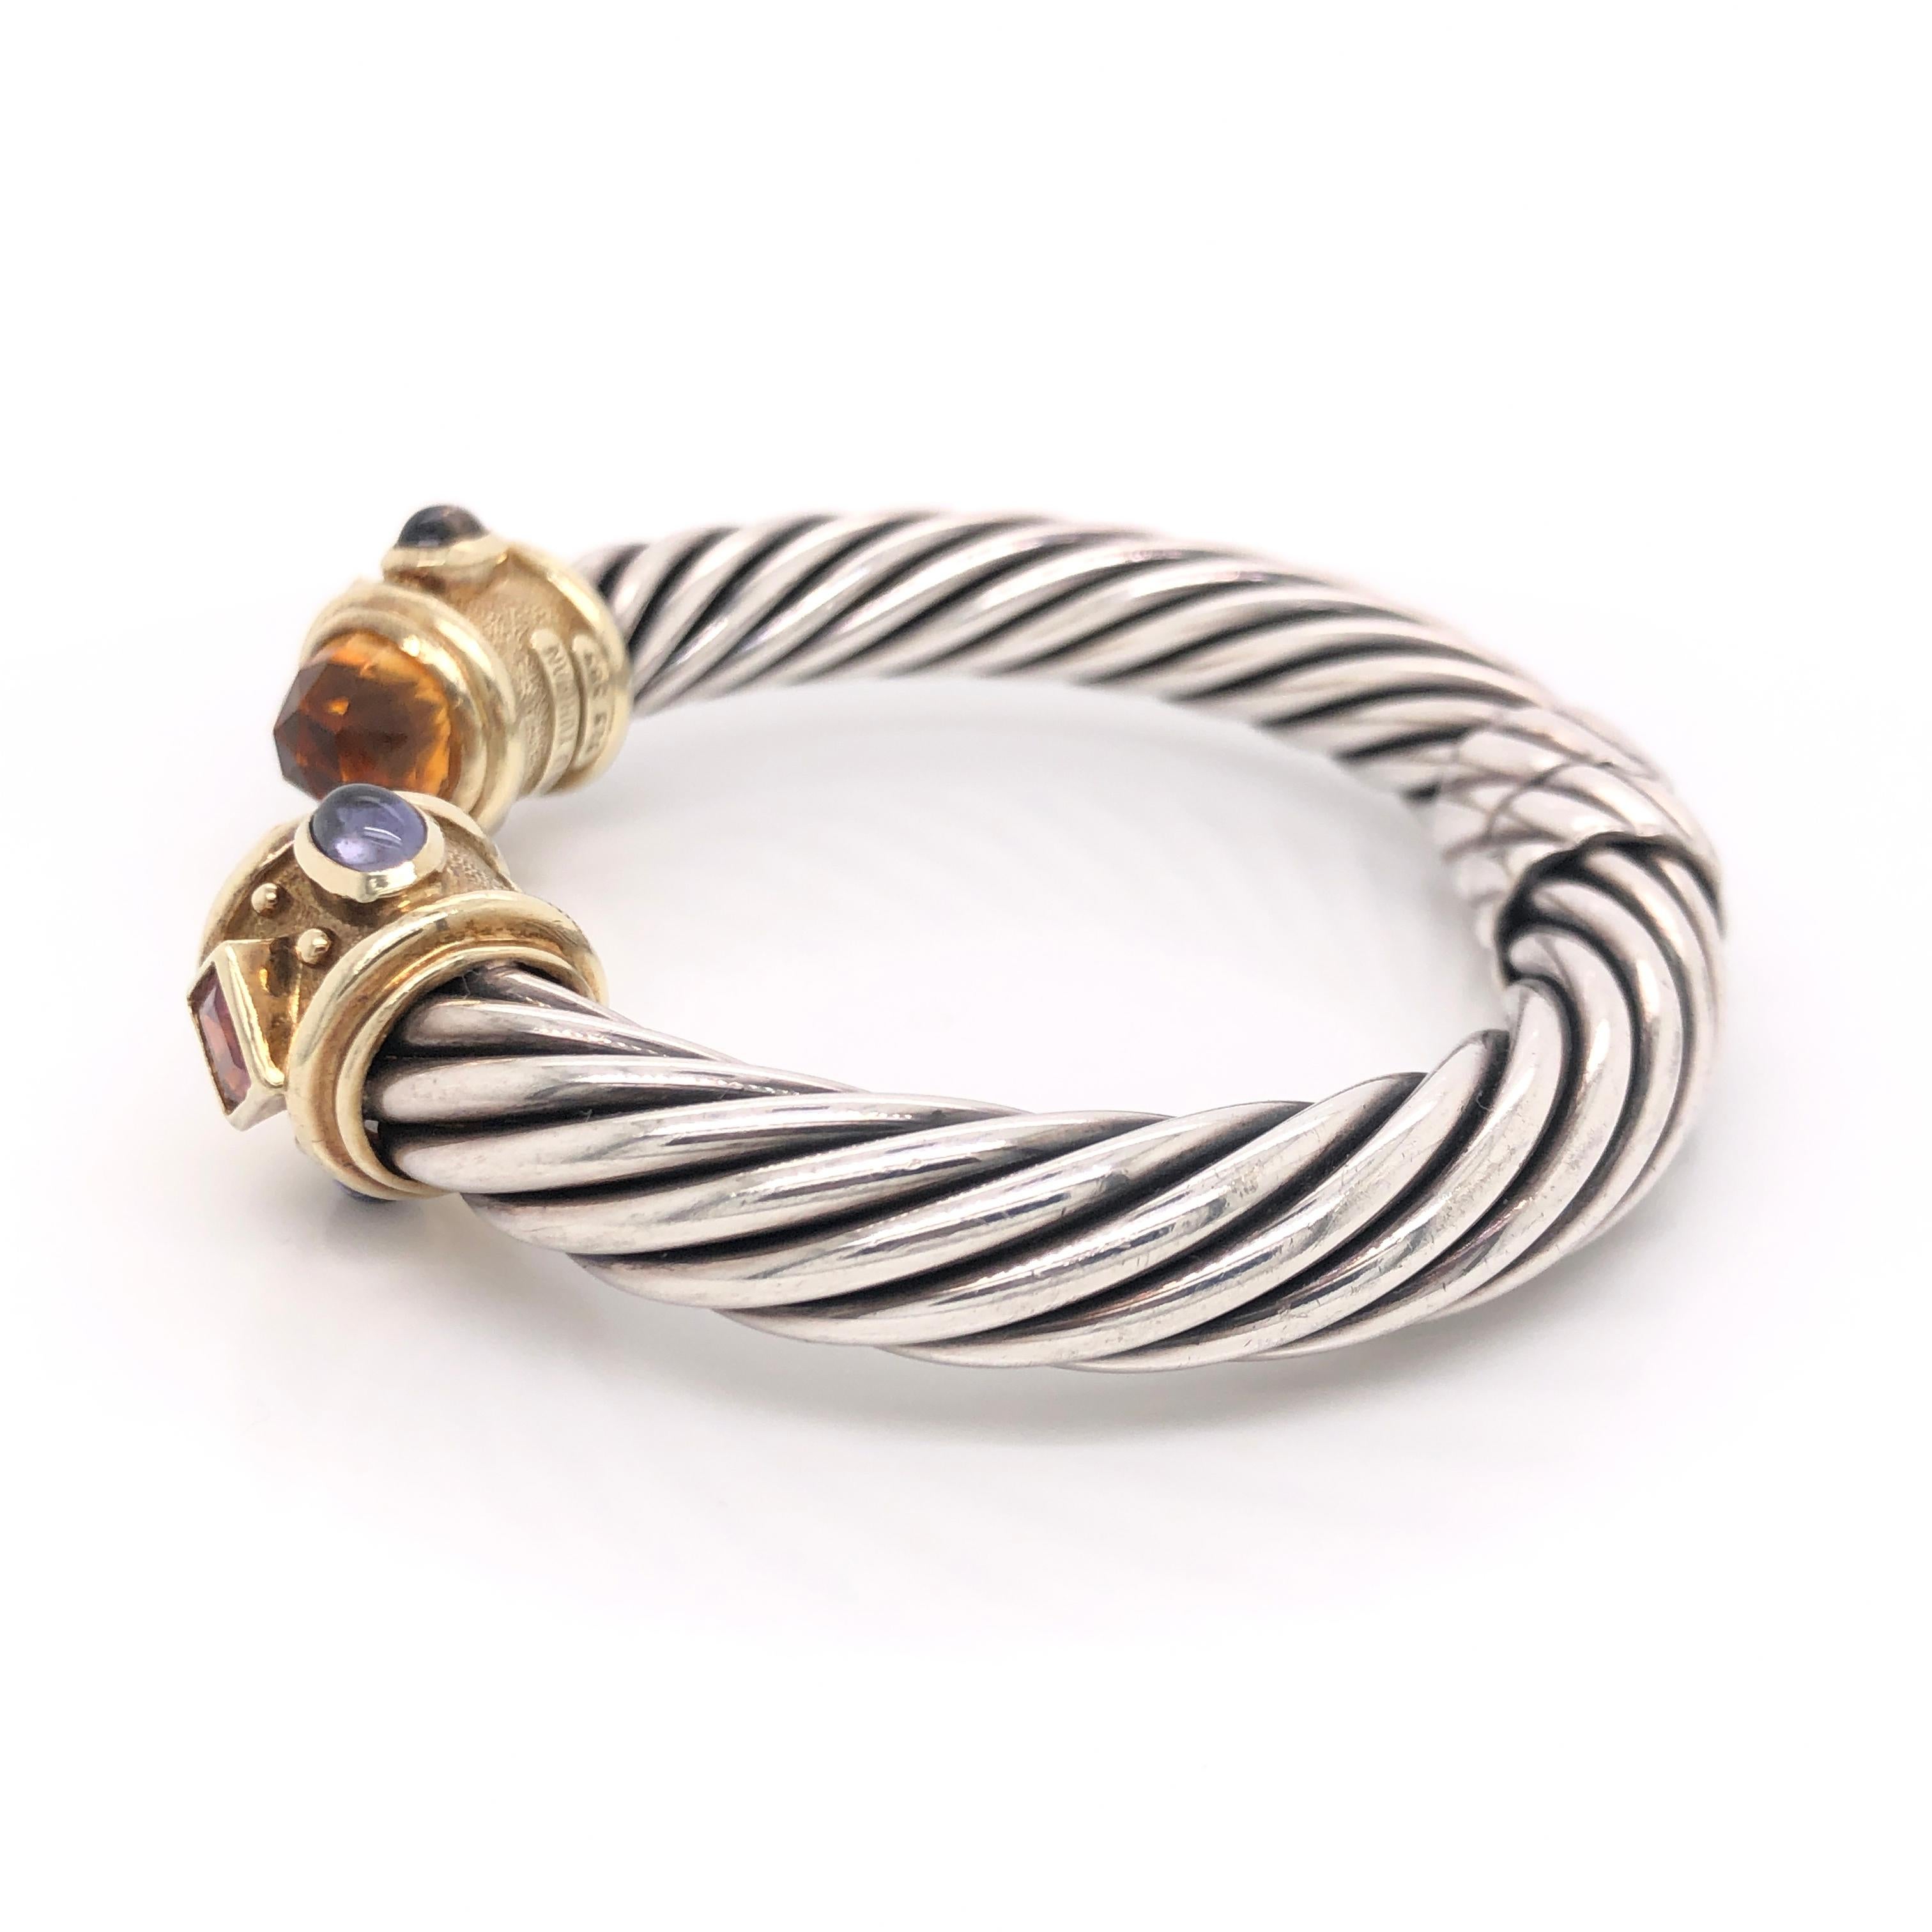 Modern David Yurman Yellow Gold and Sterling Silver Multicolored Stone Cable Bracelet